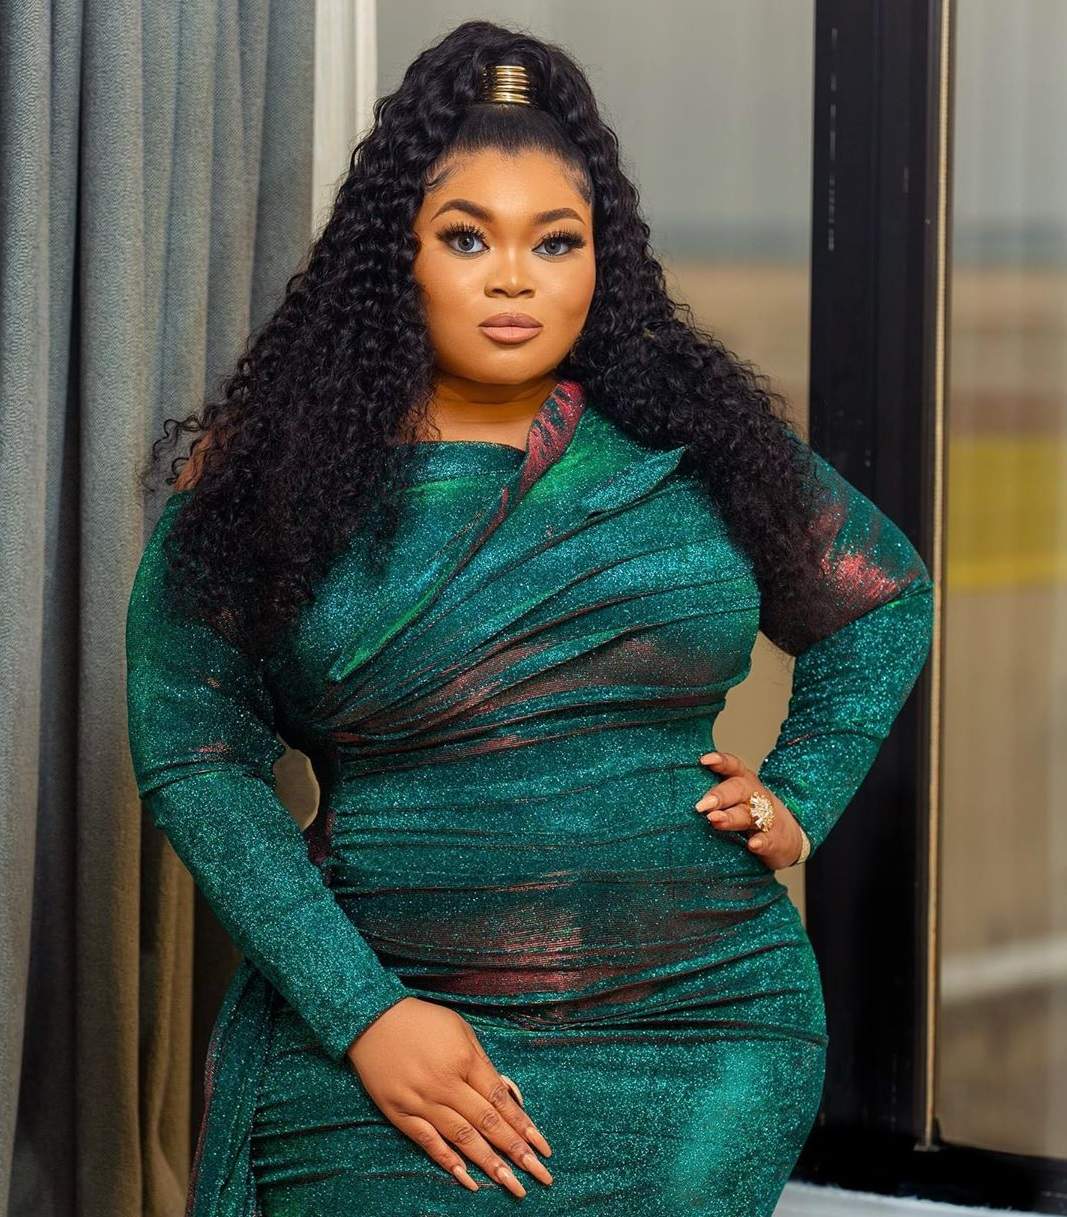 Actress, Lisa Omorodion blasts AMVCA organizers for discriminating against plus-size women